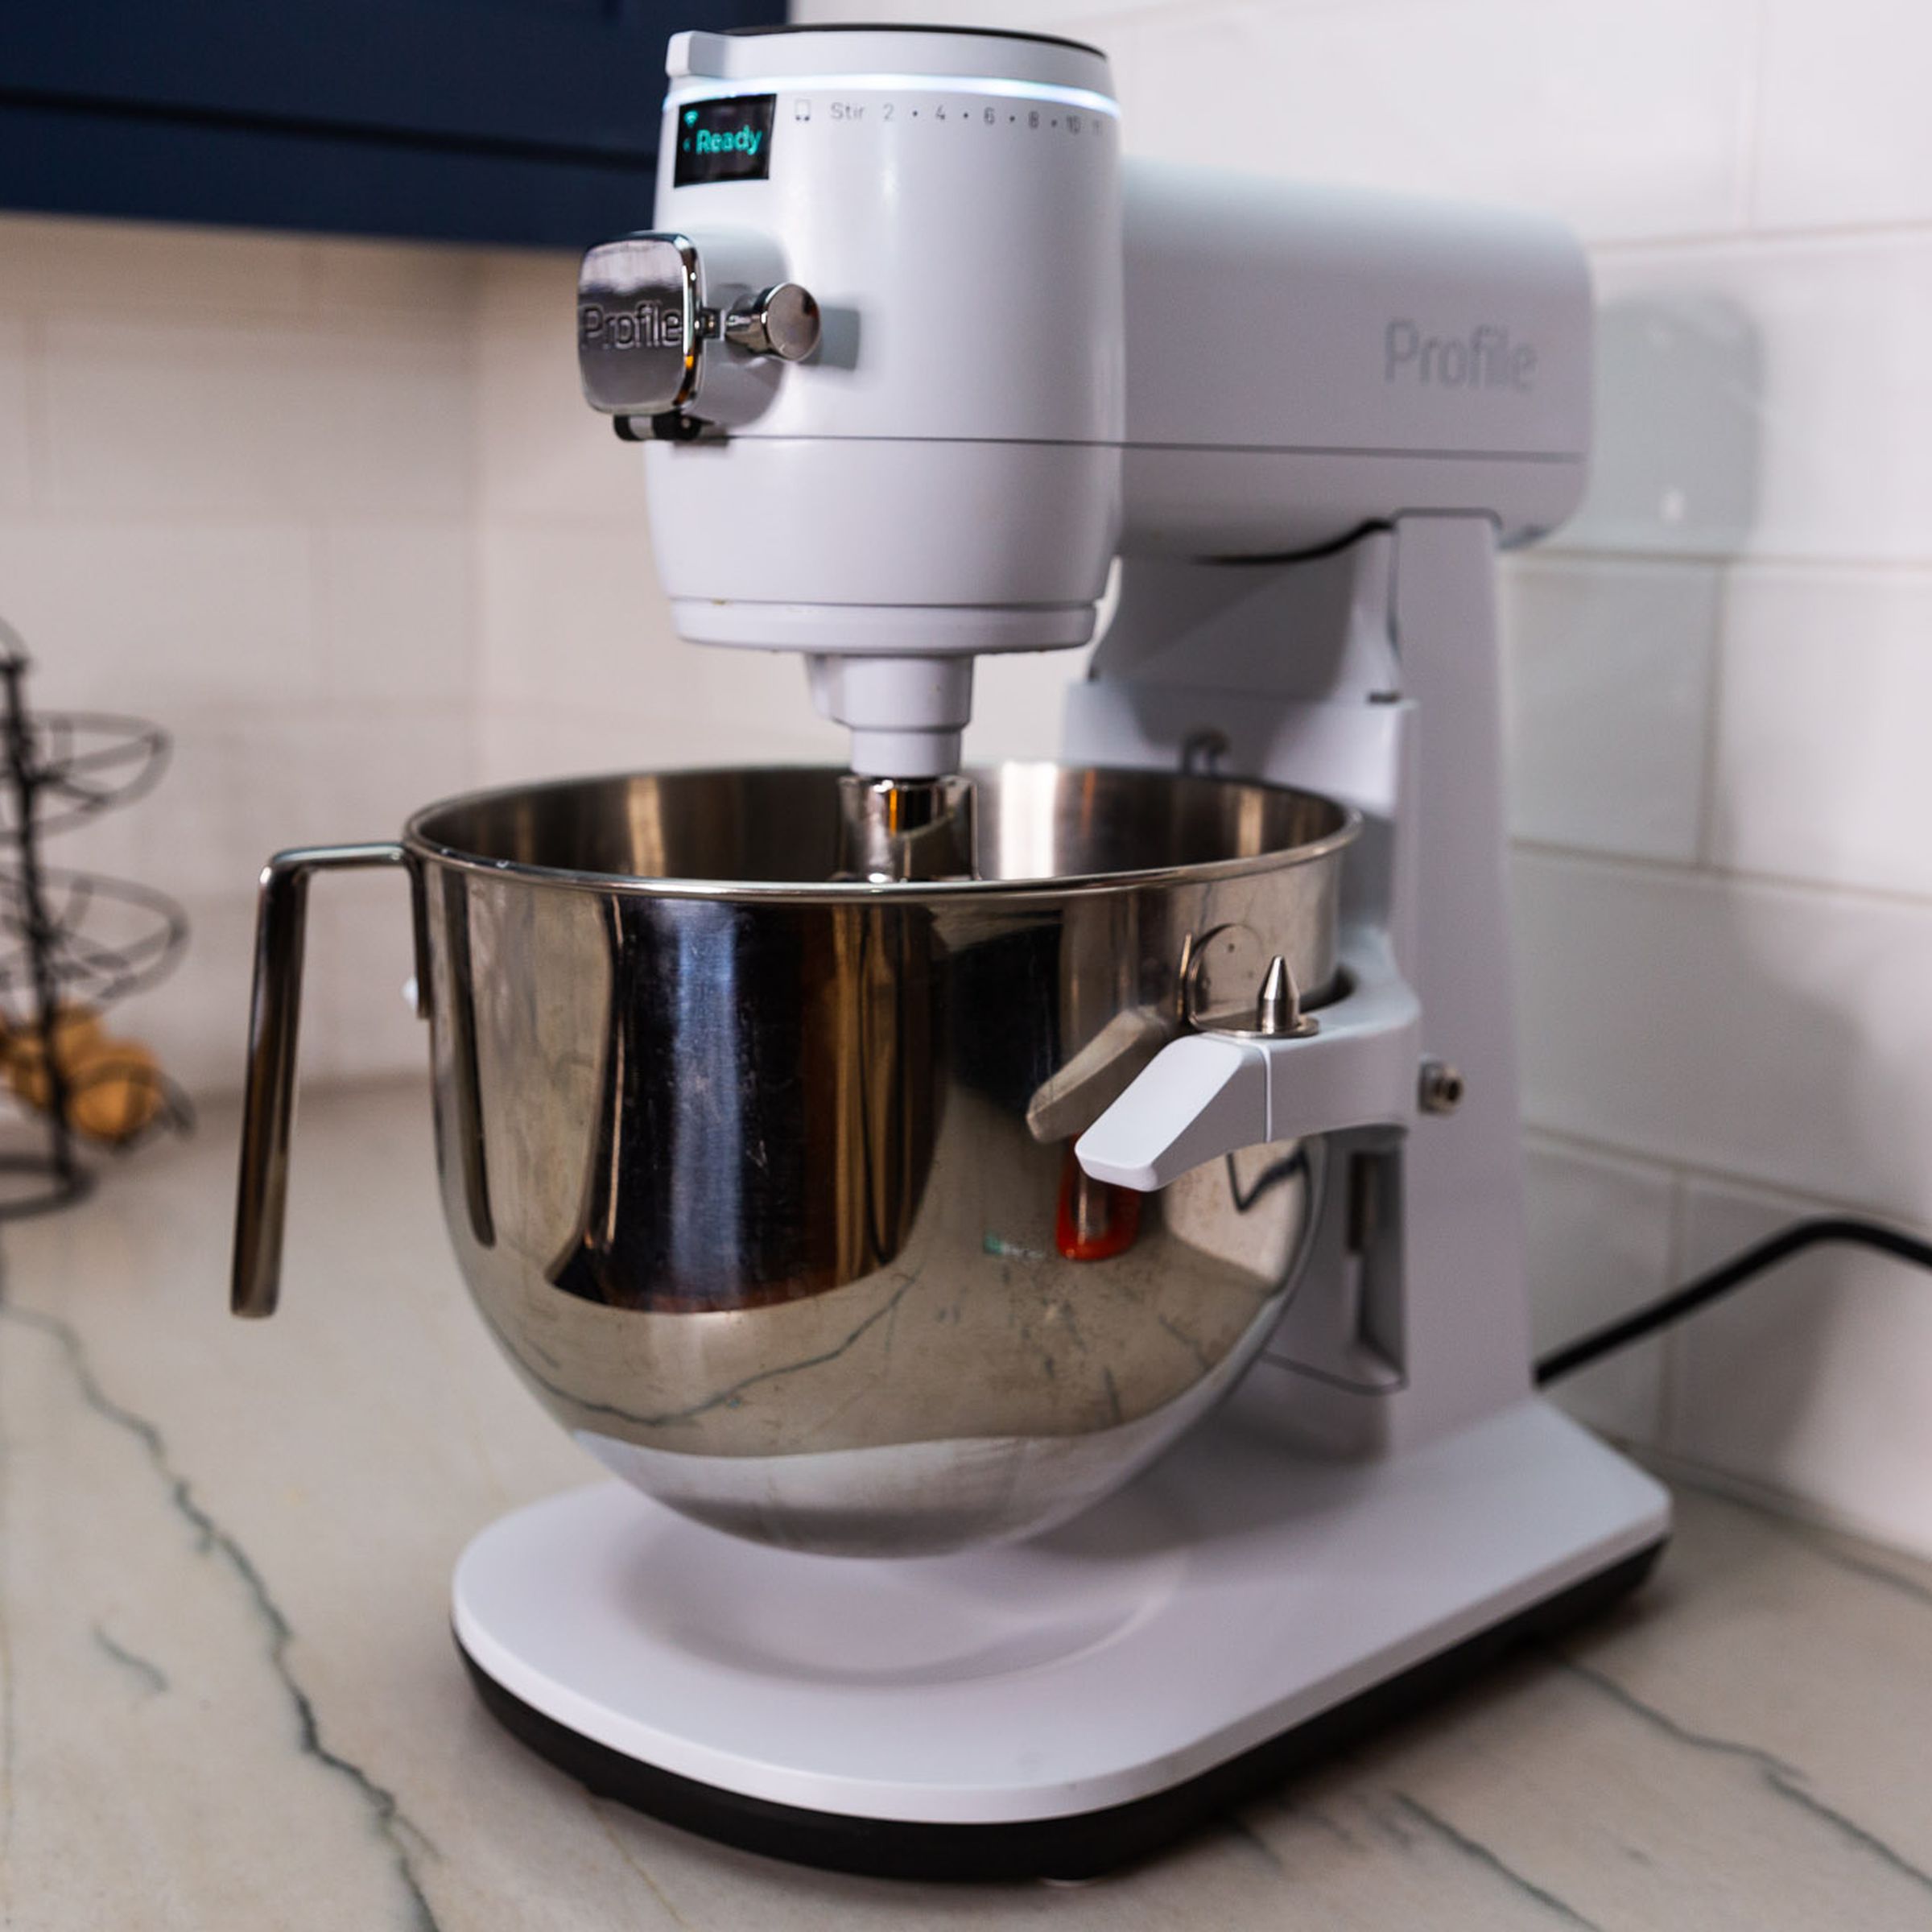 A white stand mixer on a kitchen countertop.